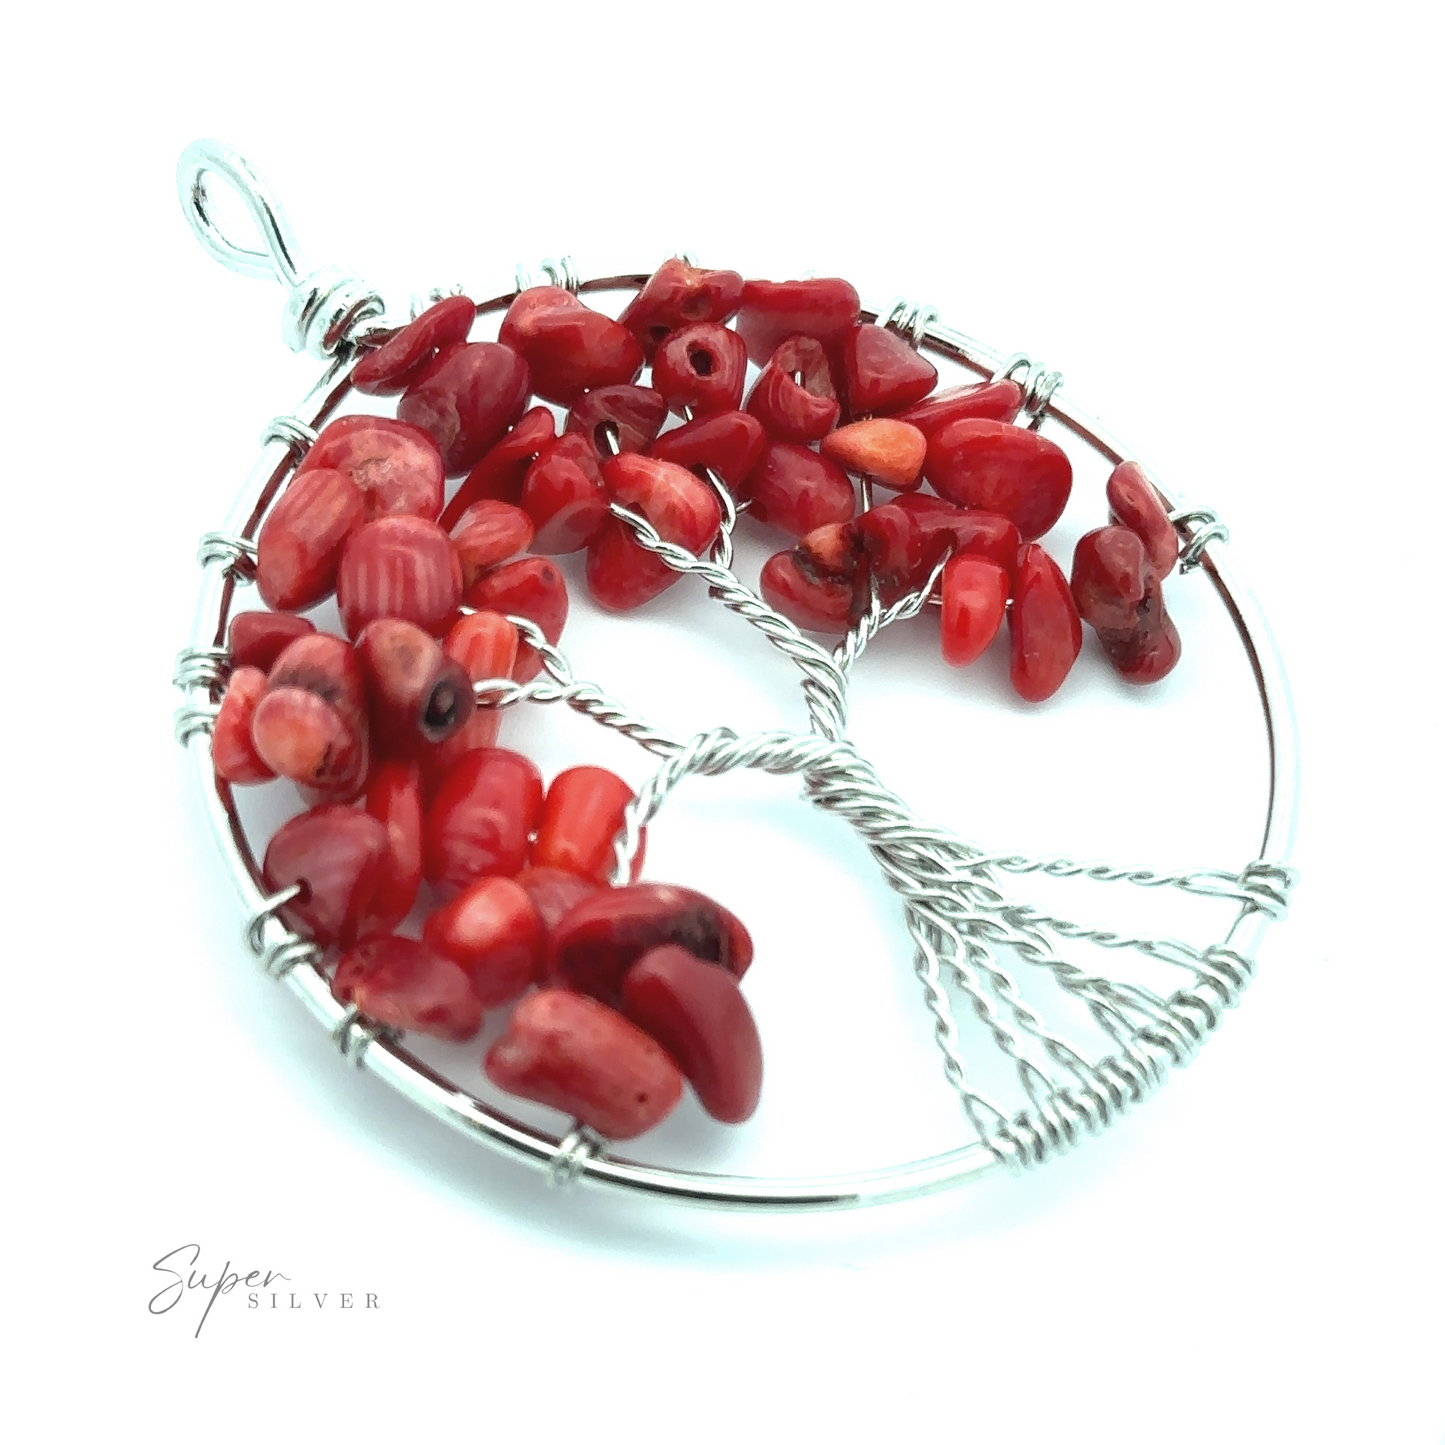 
                  
                    A Wire Wrapped Tree of Life Pendant with a silver wire frame, featuring branches and leaves made from polished red coral gemstones. The mixed metals design gives it a unique touch, set beautifully against a white background.
                  
                